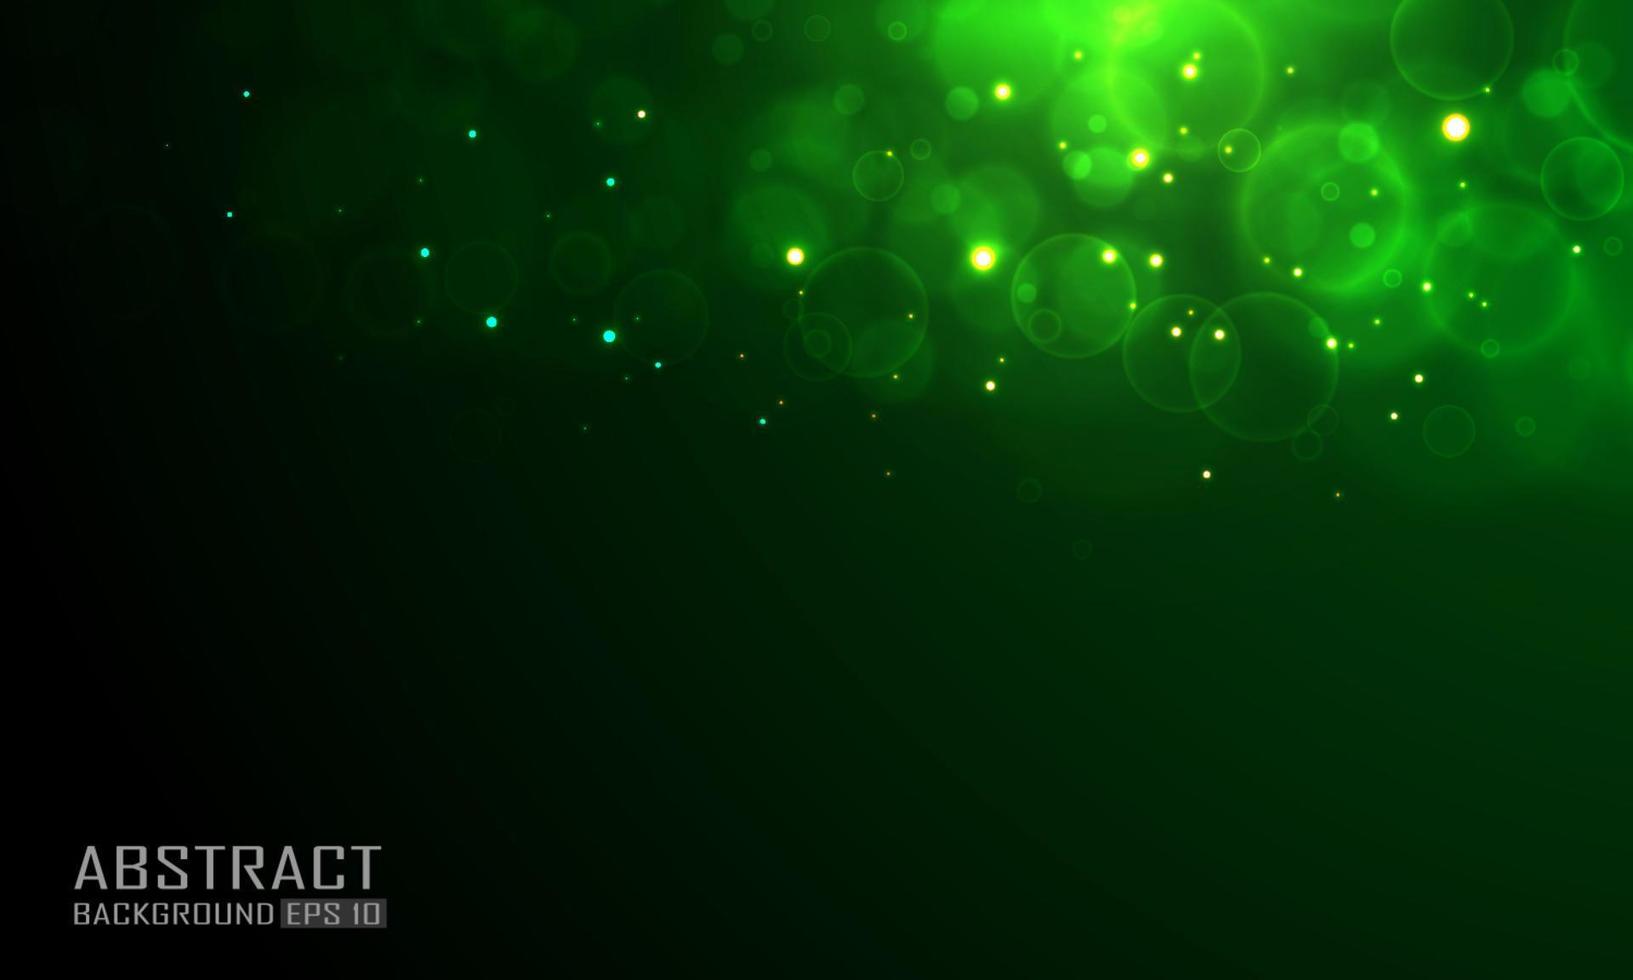 Green bokeh glowing particles blur abstract background vector